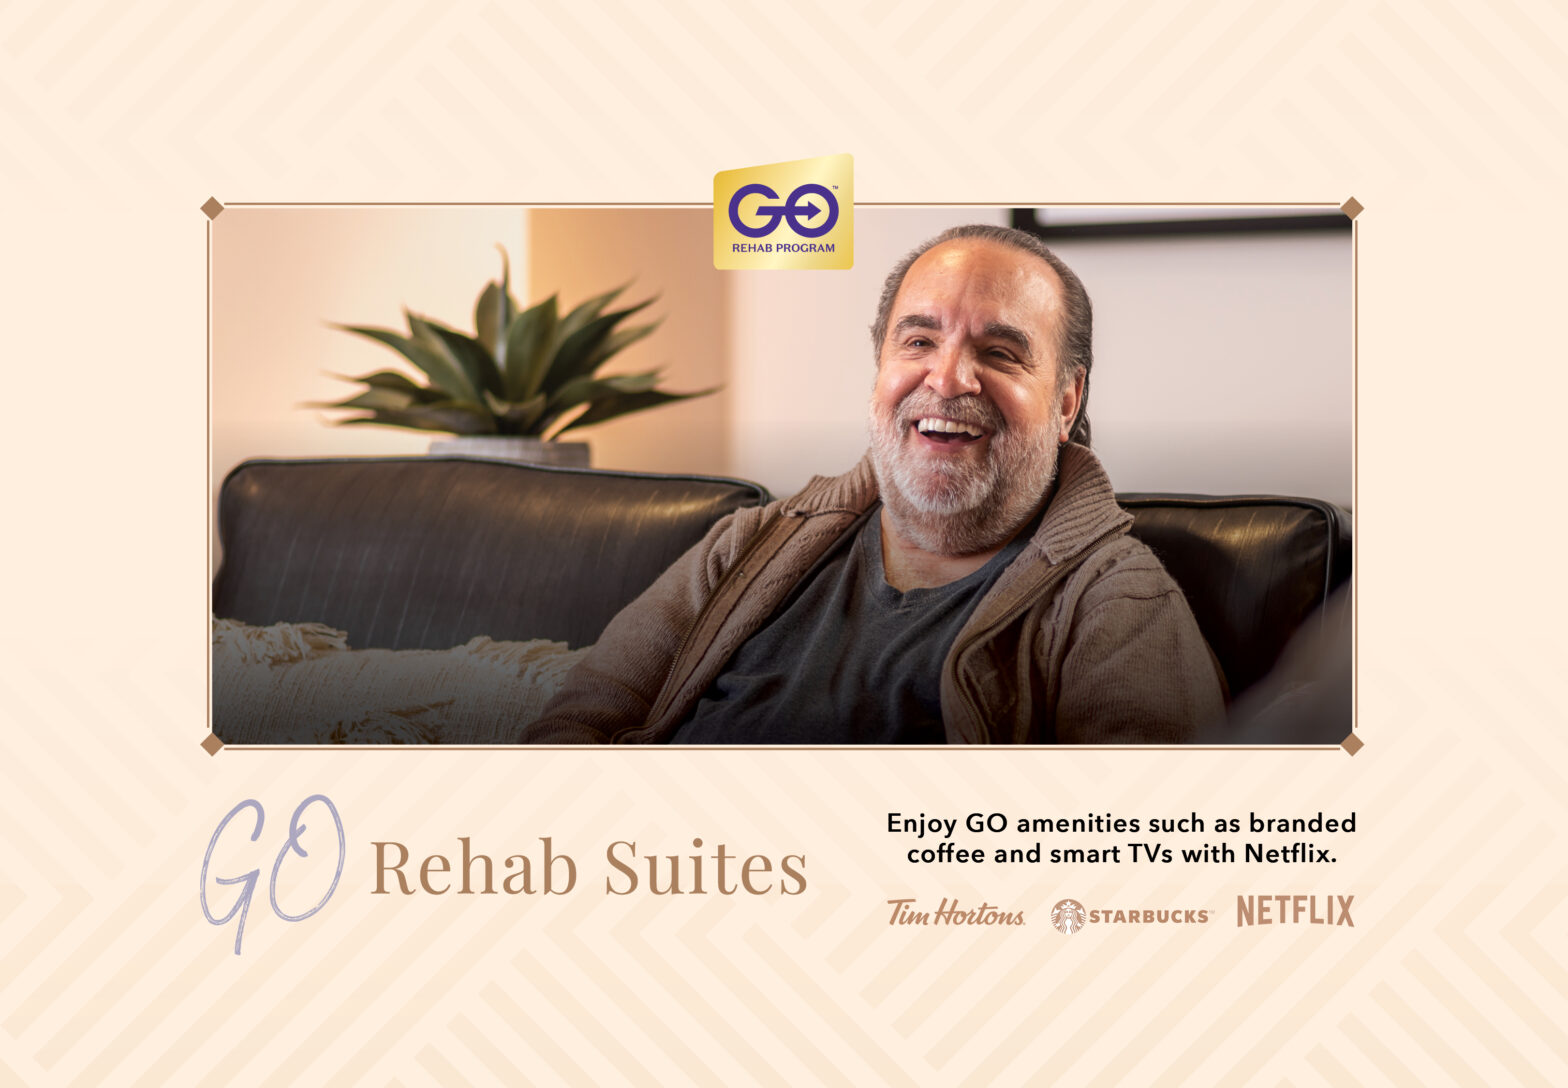 Discover the GO Rehabilitation Suites at Centers Health Care